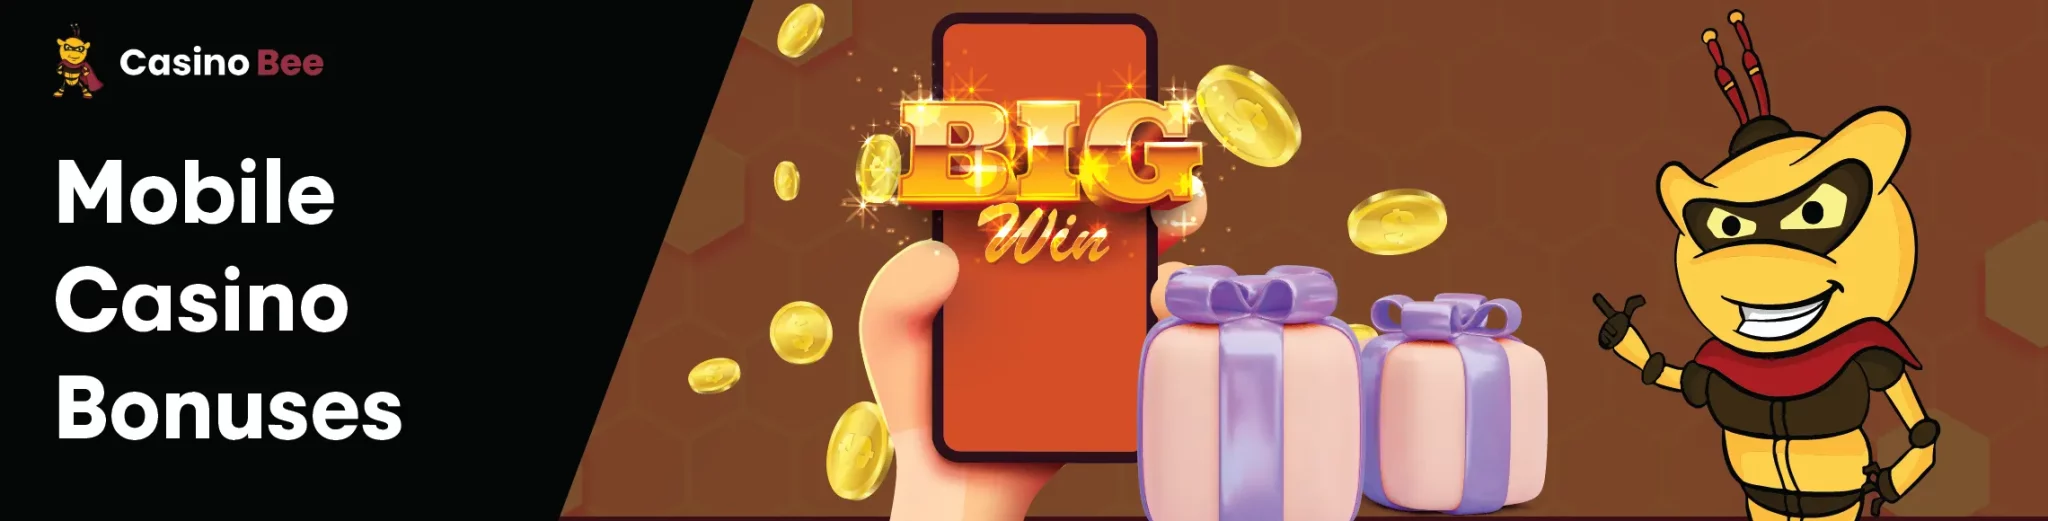 Unlock Exclusive Bonuses on Mobile Casinos and Apps